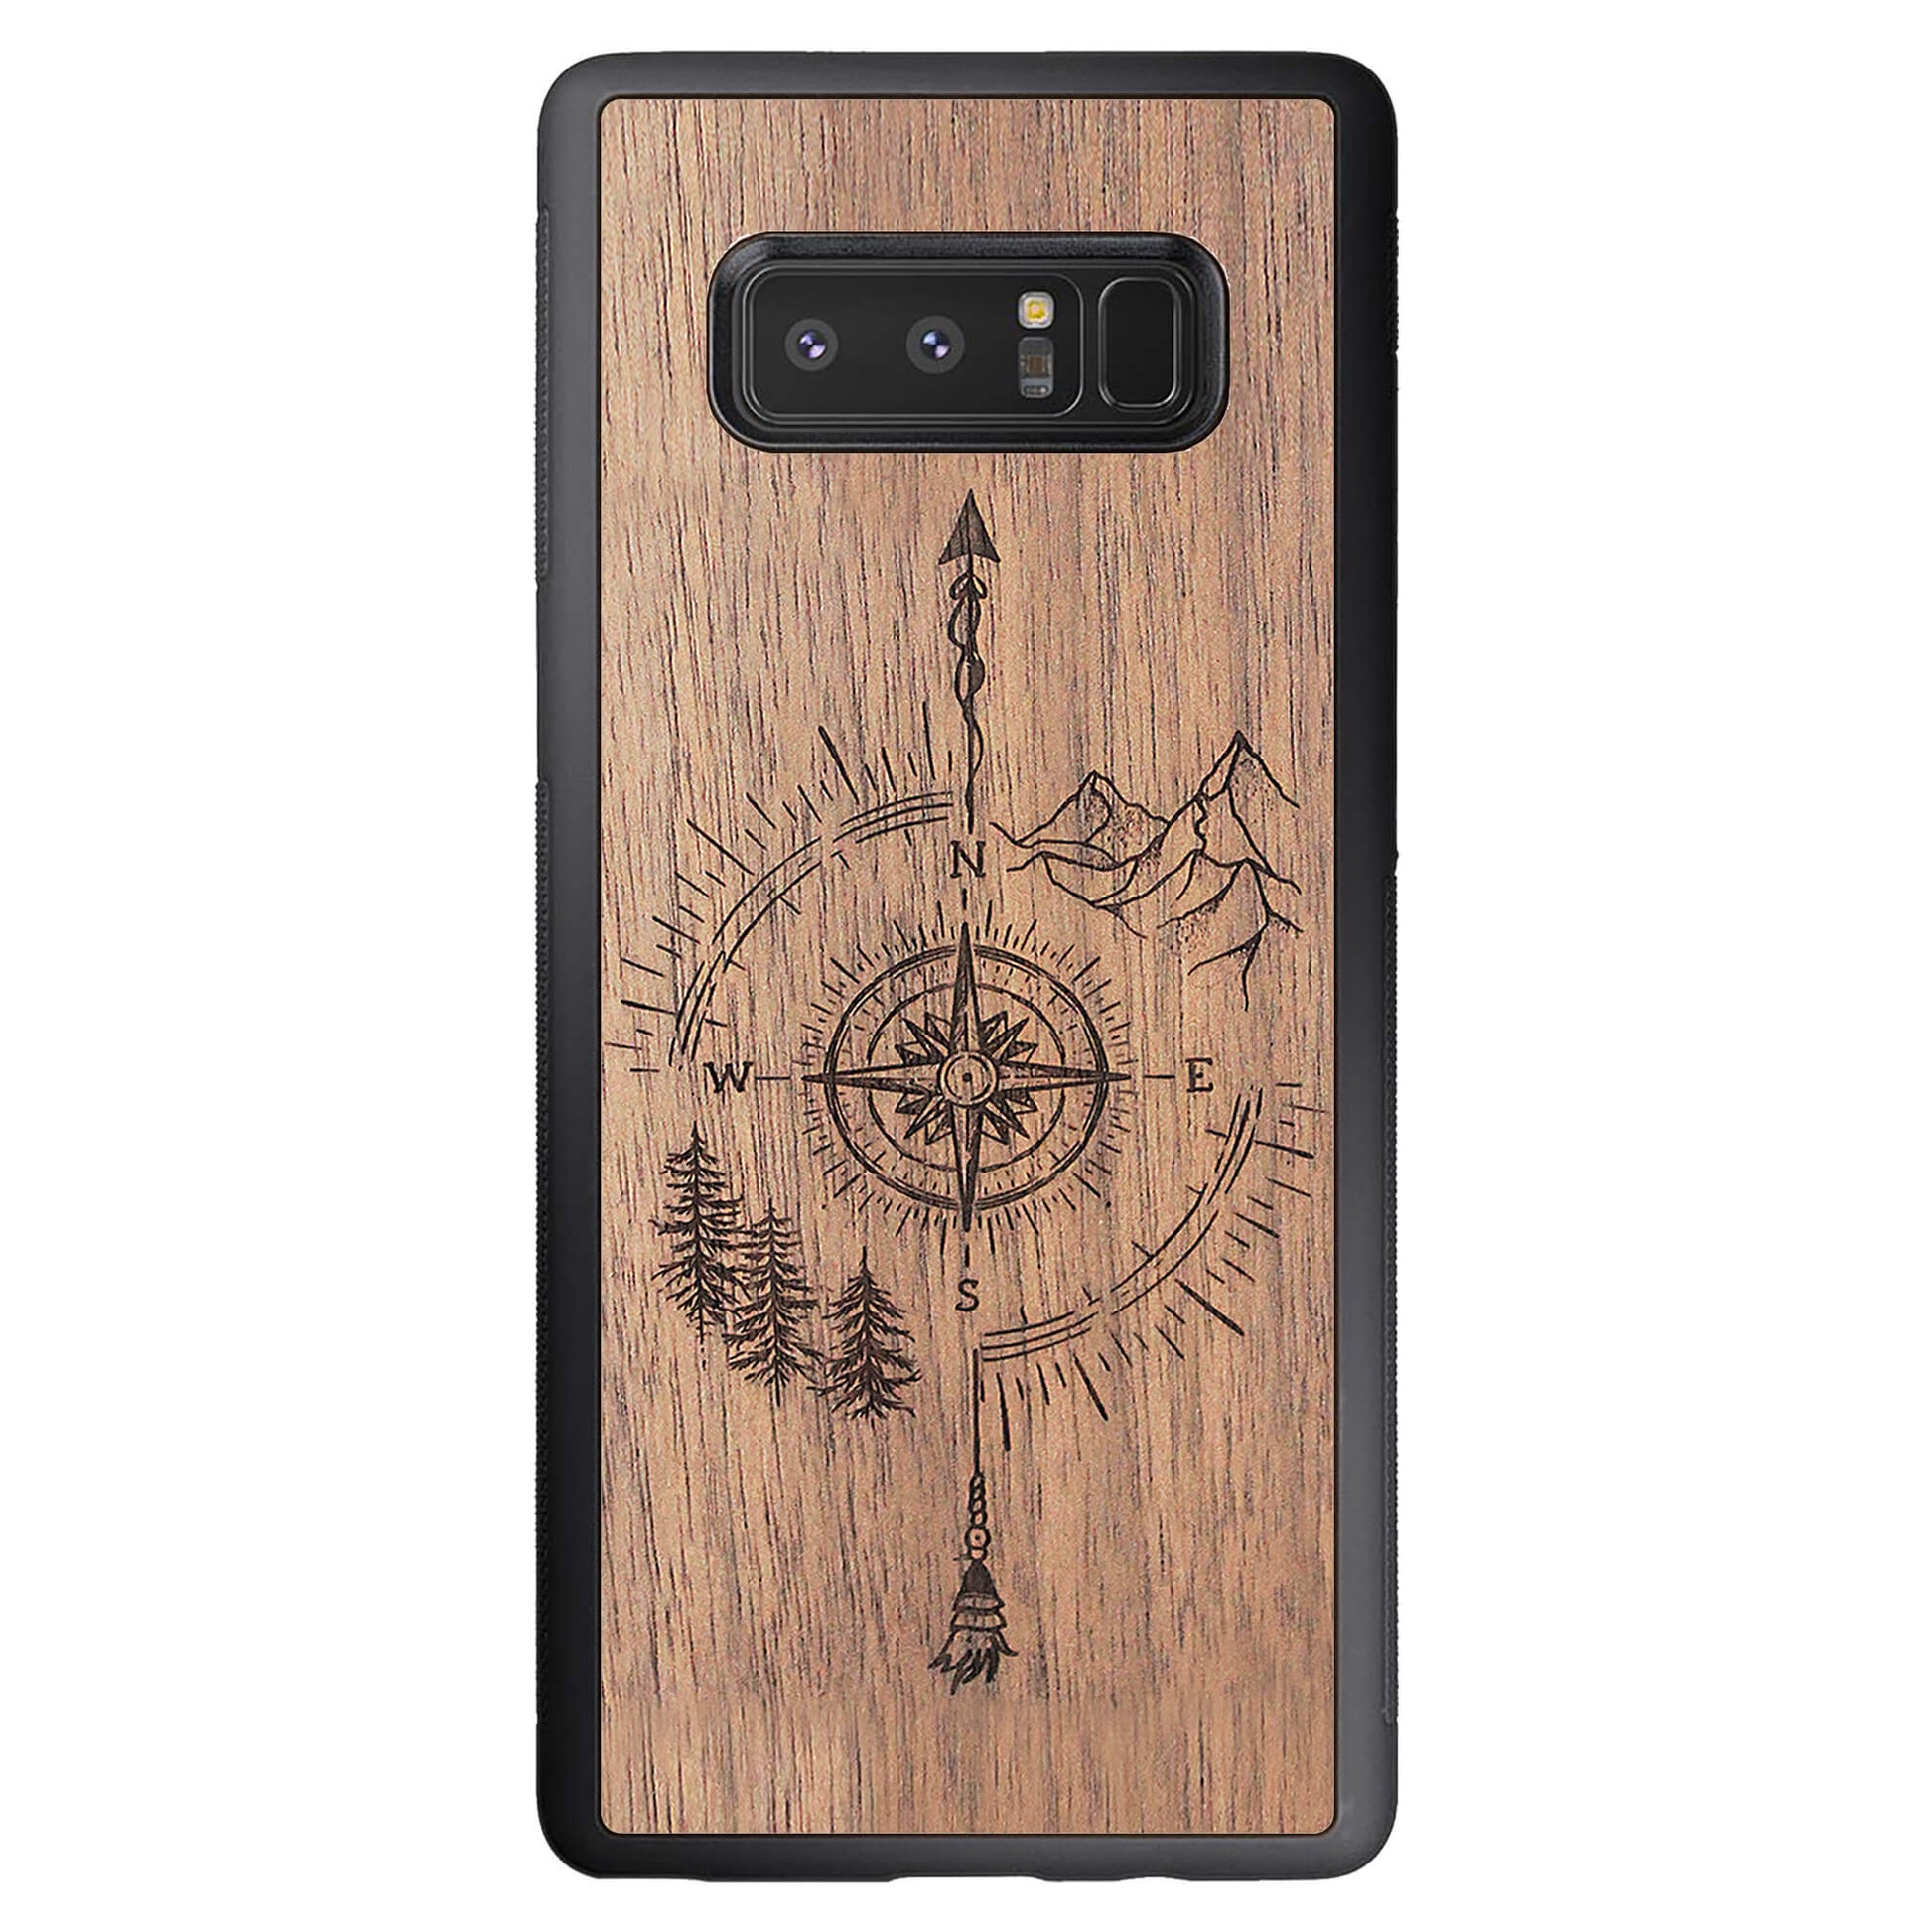 Wooden Case for Samsung Galaxy Note 8 Just Go